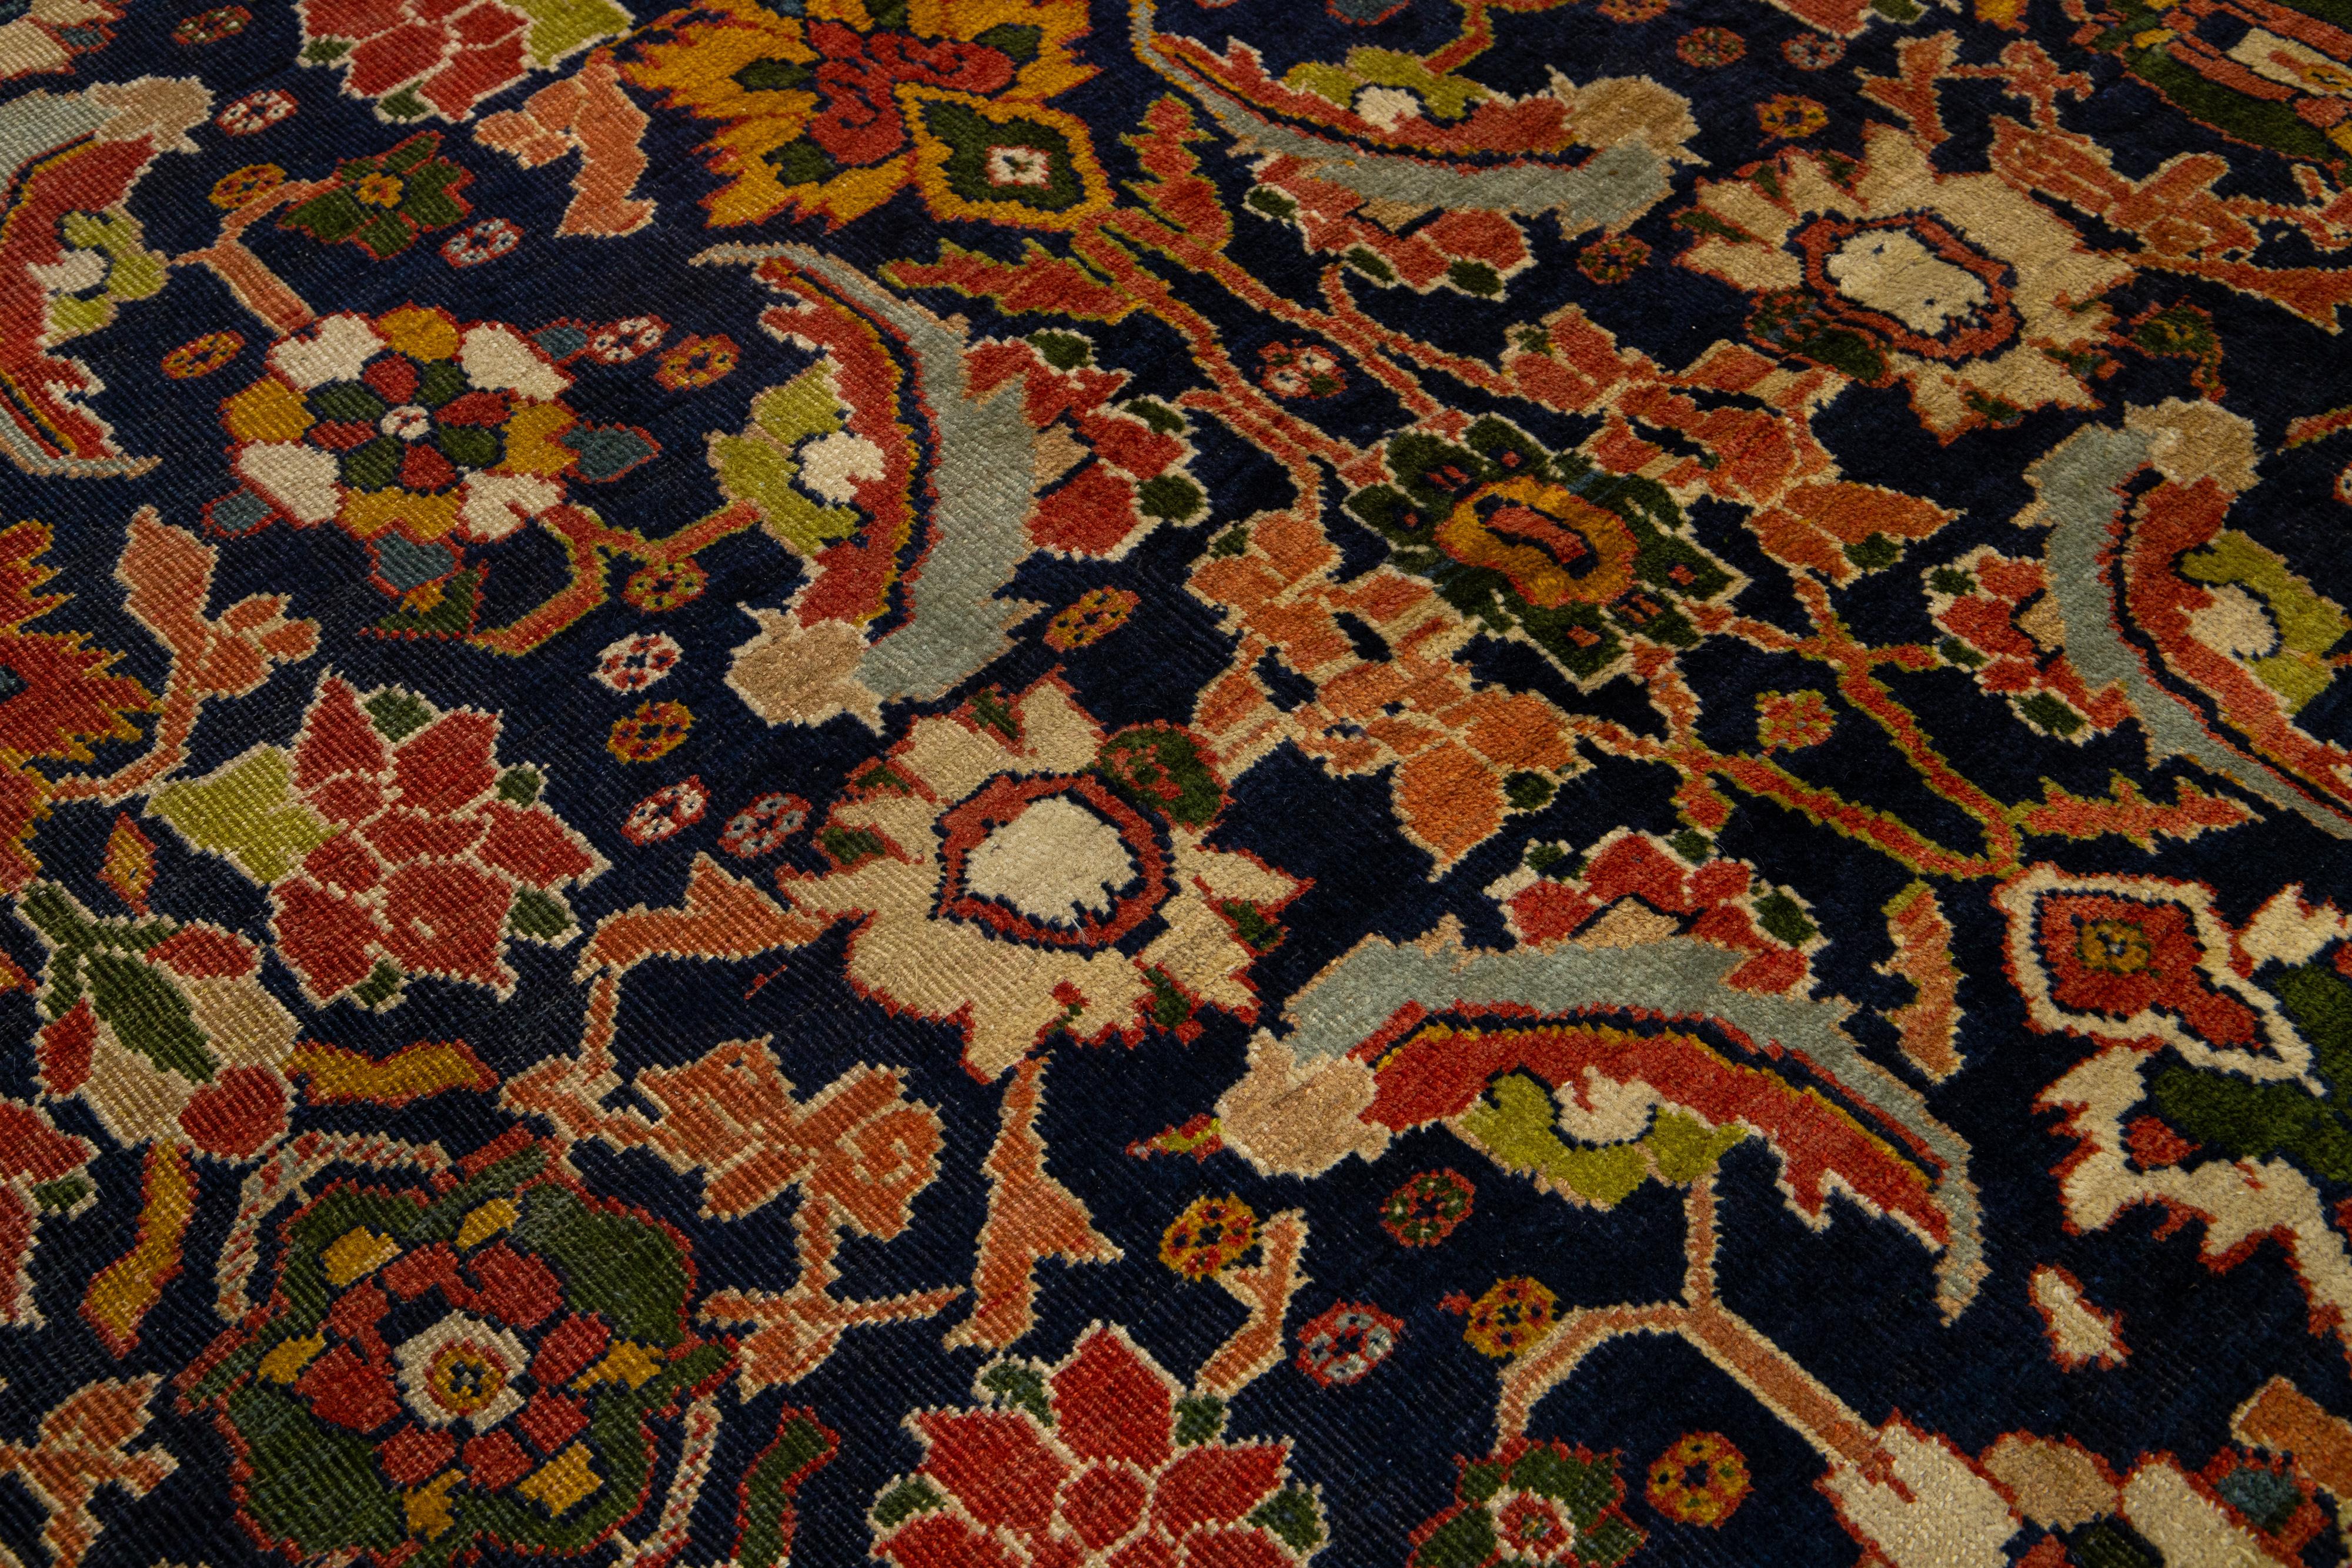 Blue Antique Persian Sultanabad Wool Rug From the 1880s With Floral Motif For Sale 3